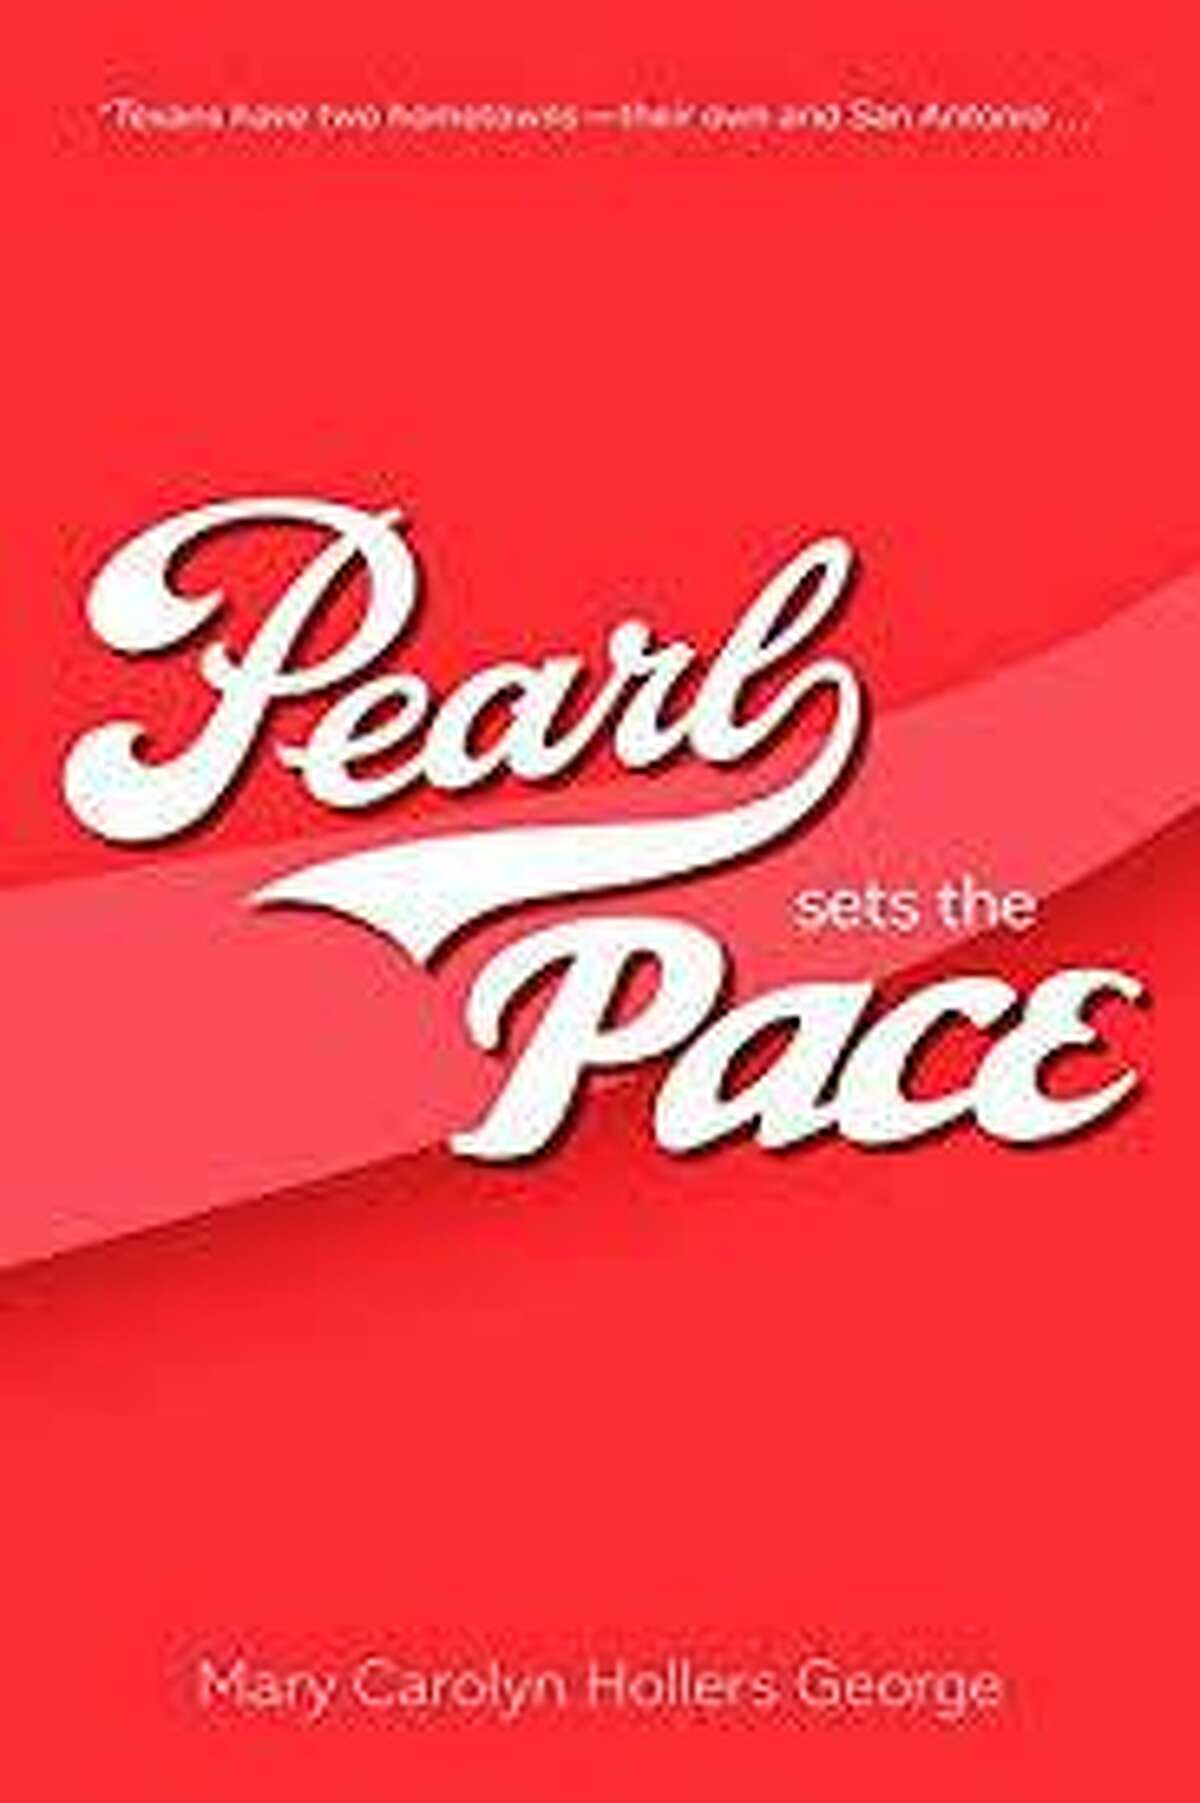 This is the cover of “Pearl Sets the Pace” by Mary Carolyn Hollers, which tells the history of San Antonio’s Koehler-Pace clan that has survived personal and societal shakeups to produce a beer that became a regional staple and the picante sauce that elbowed ketchup off American tables.